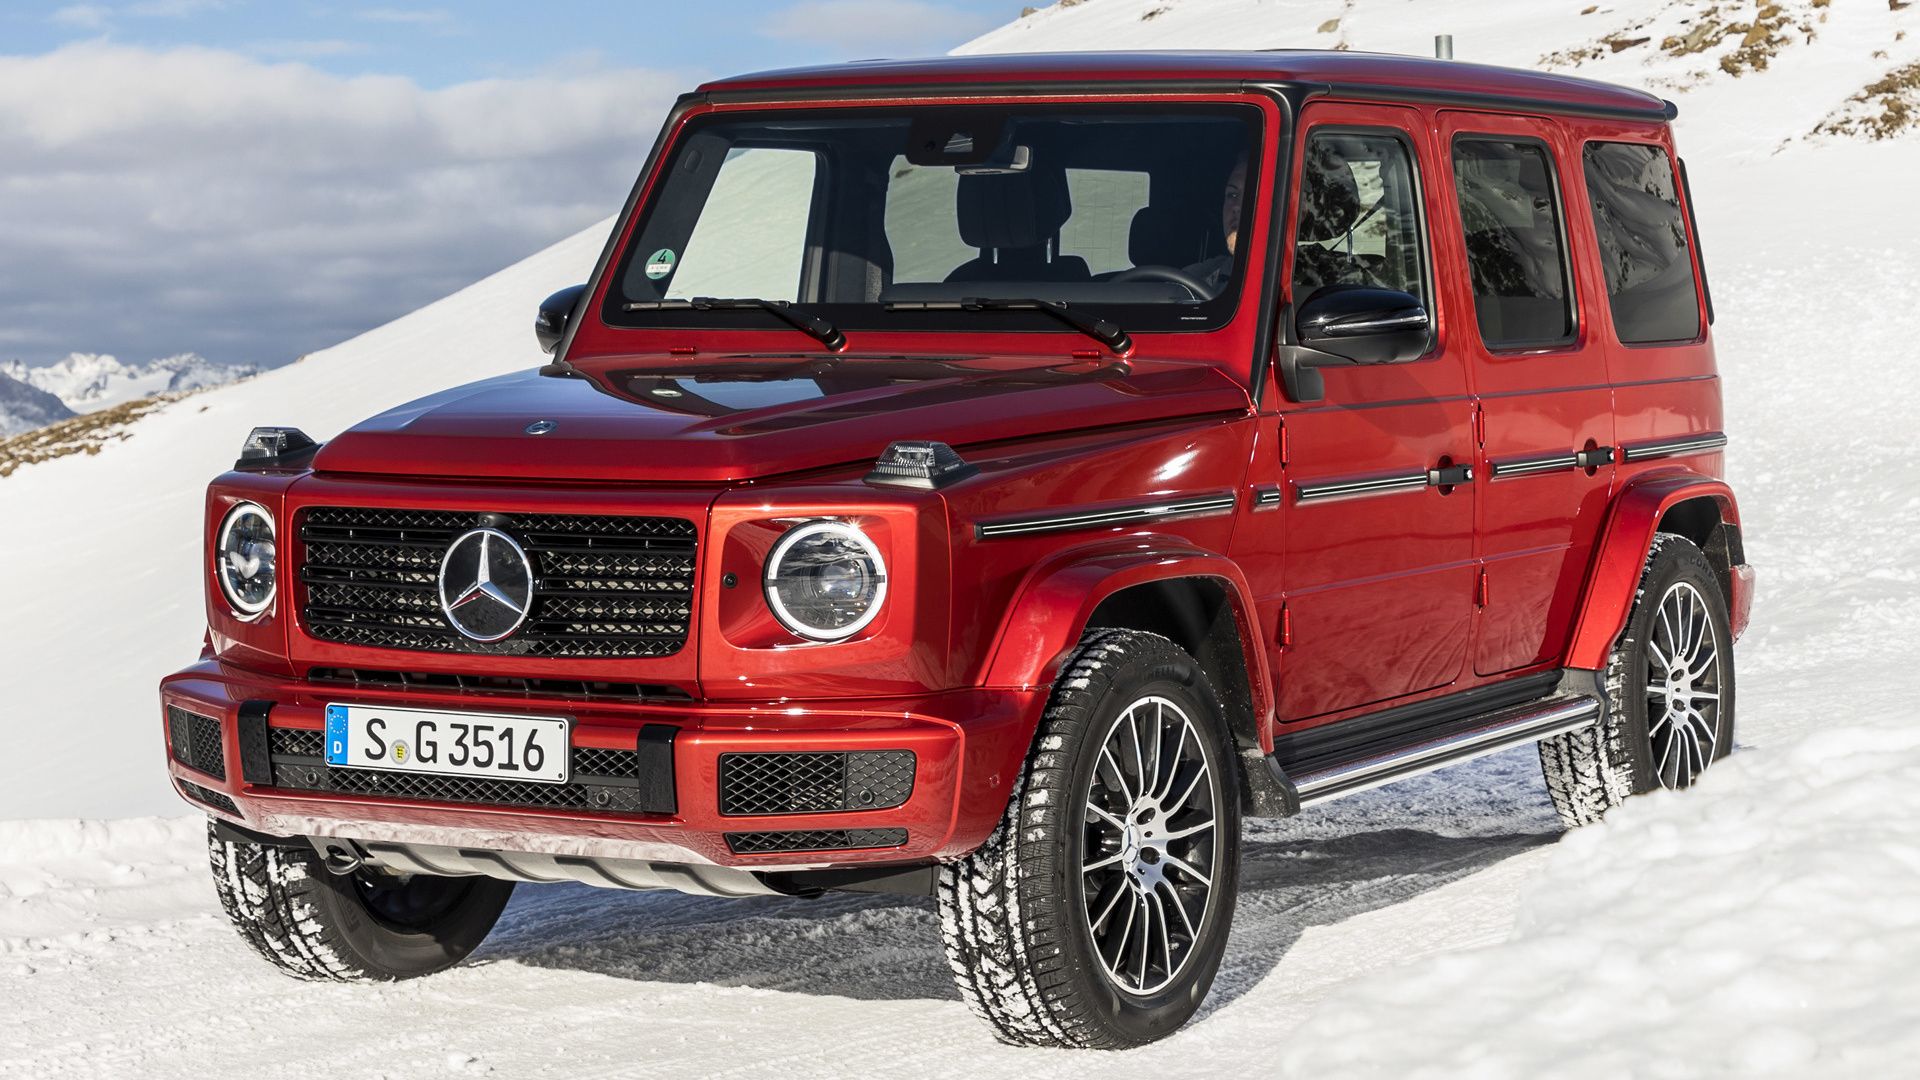 Mercedes Benz G Class And HD Image